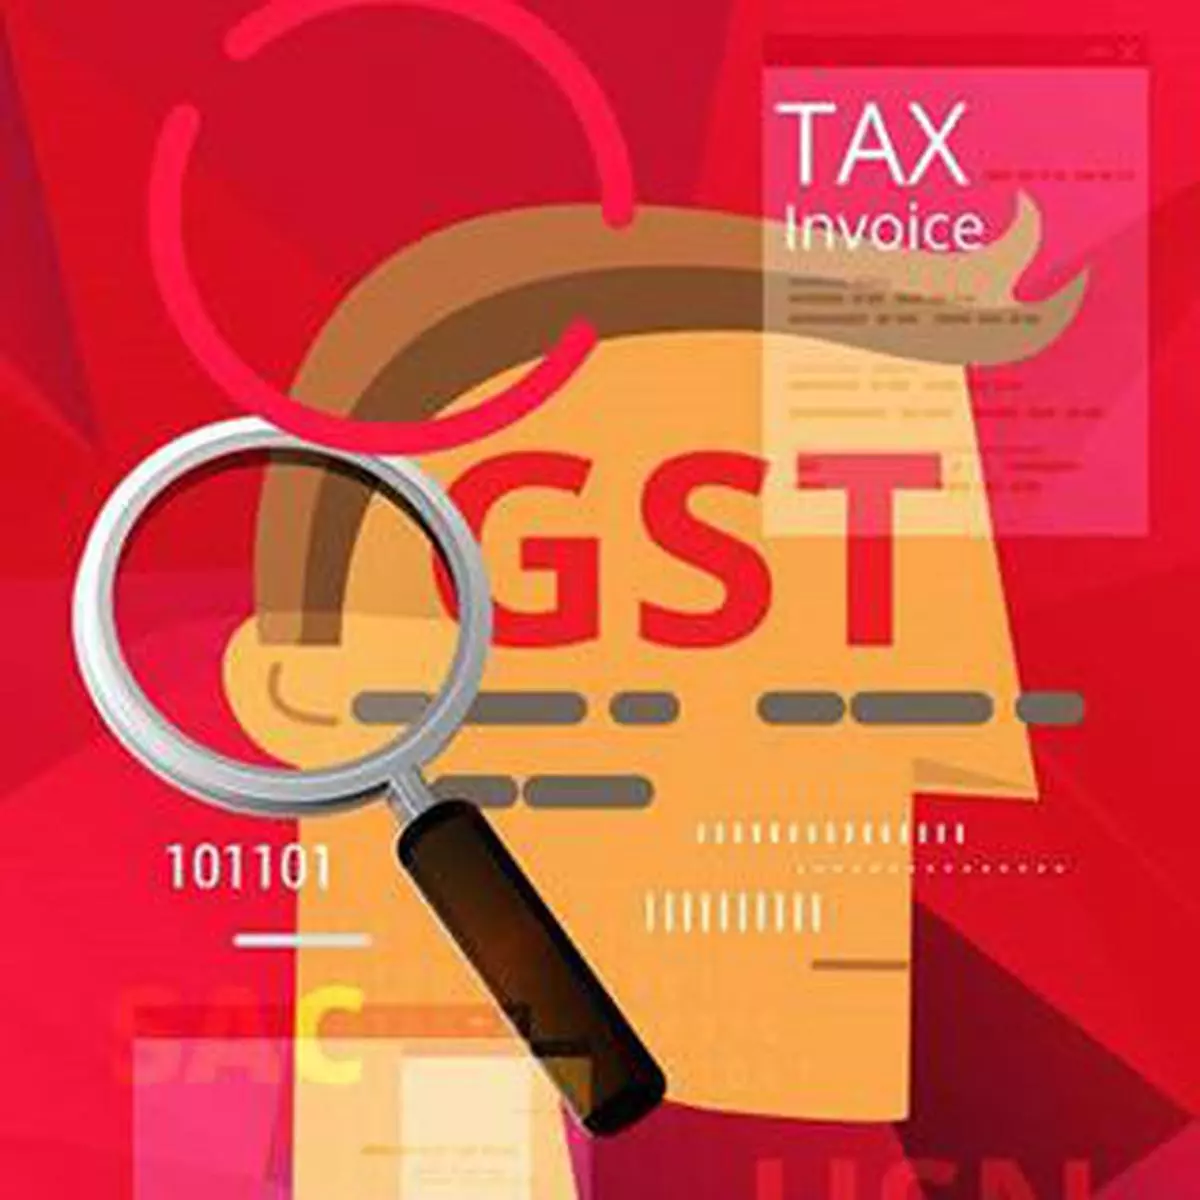 Government Tax - GST Compliance  - Illustration as EPS 10 File